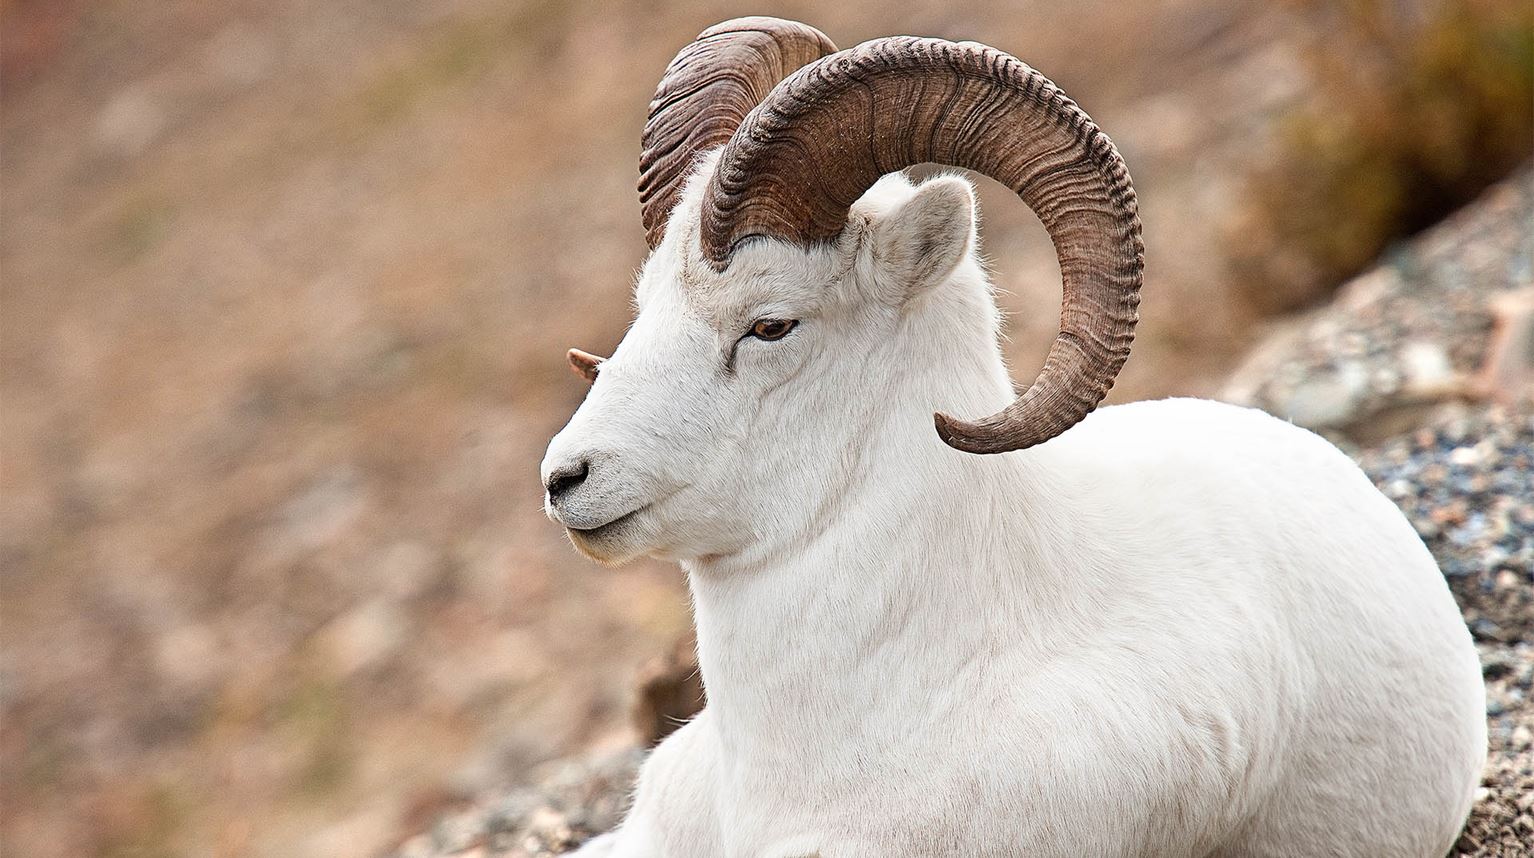 White mountain sheep with curling brown horns